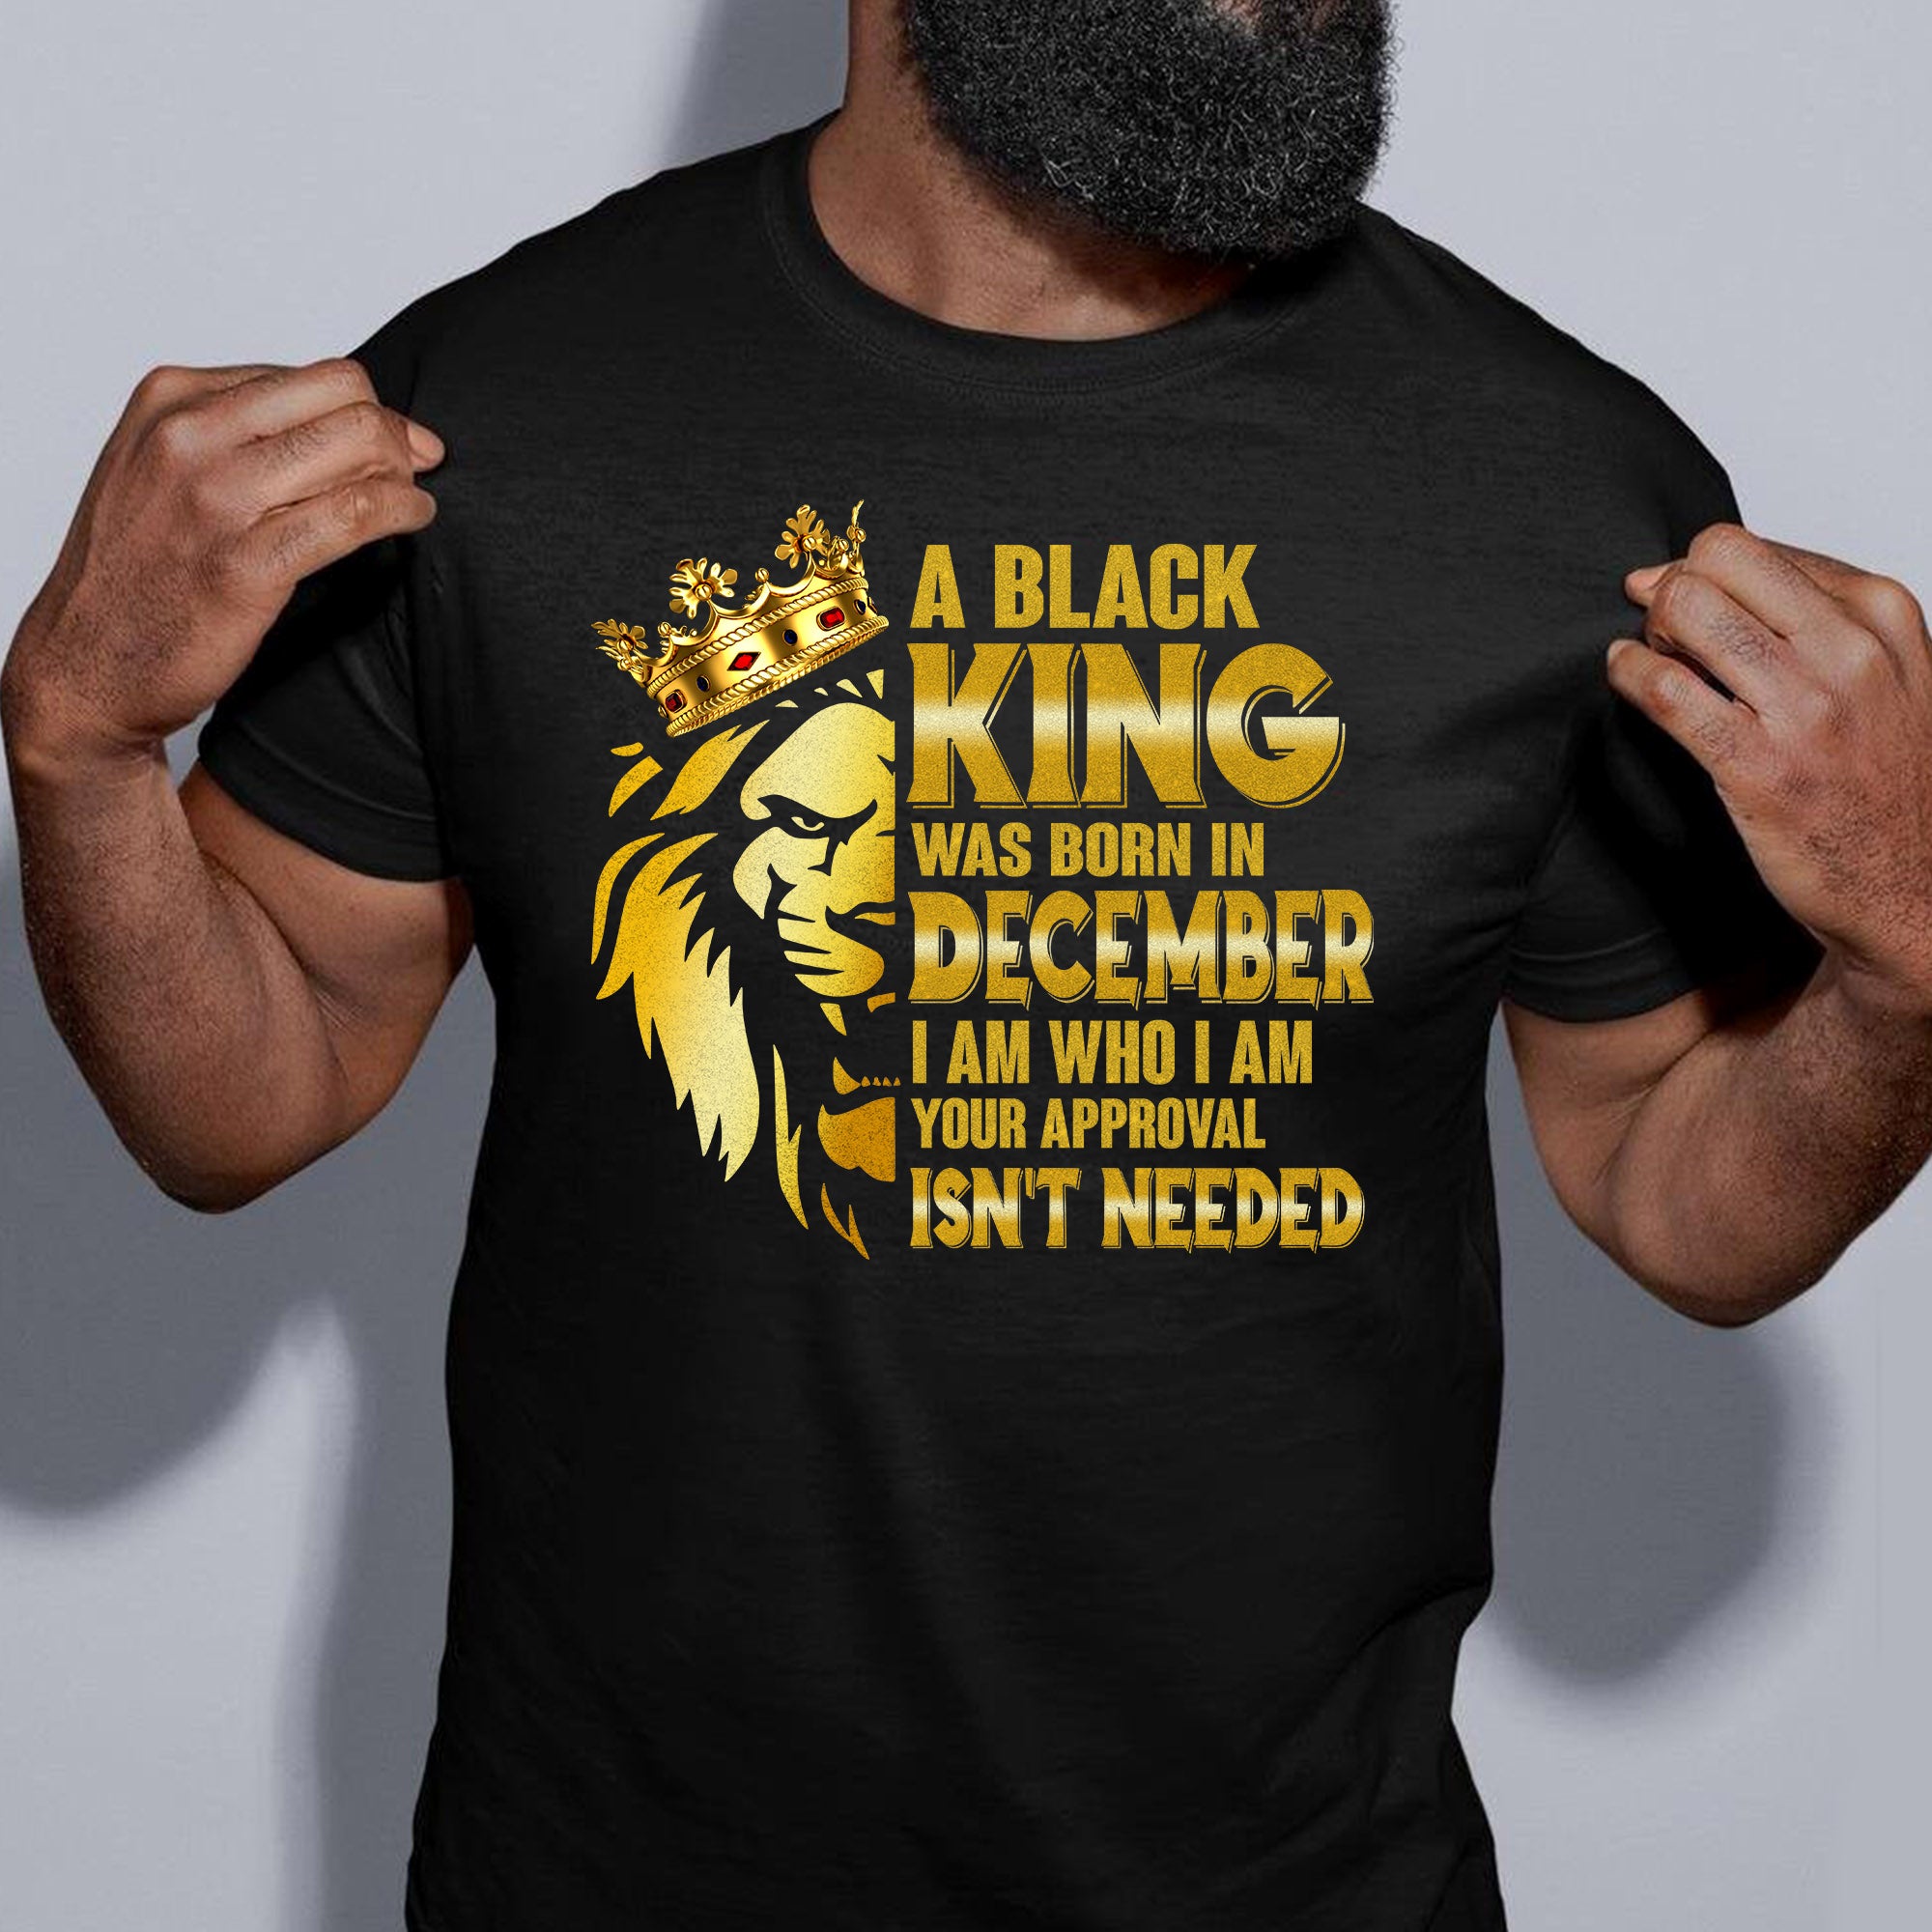 A Black King Was Born In December T-Shirt